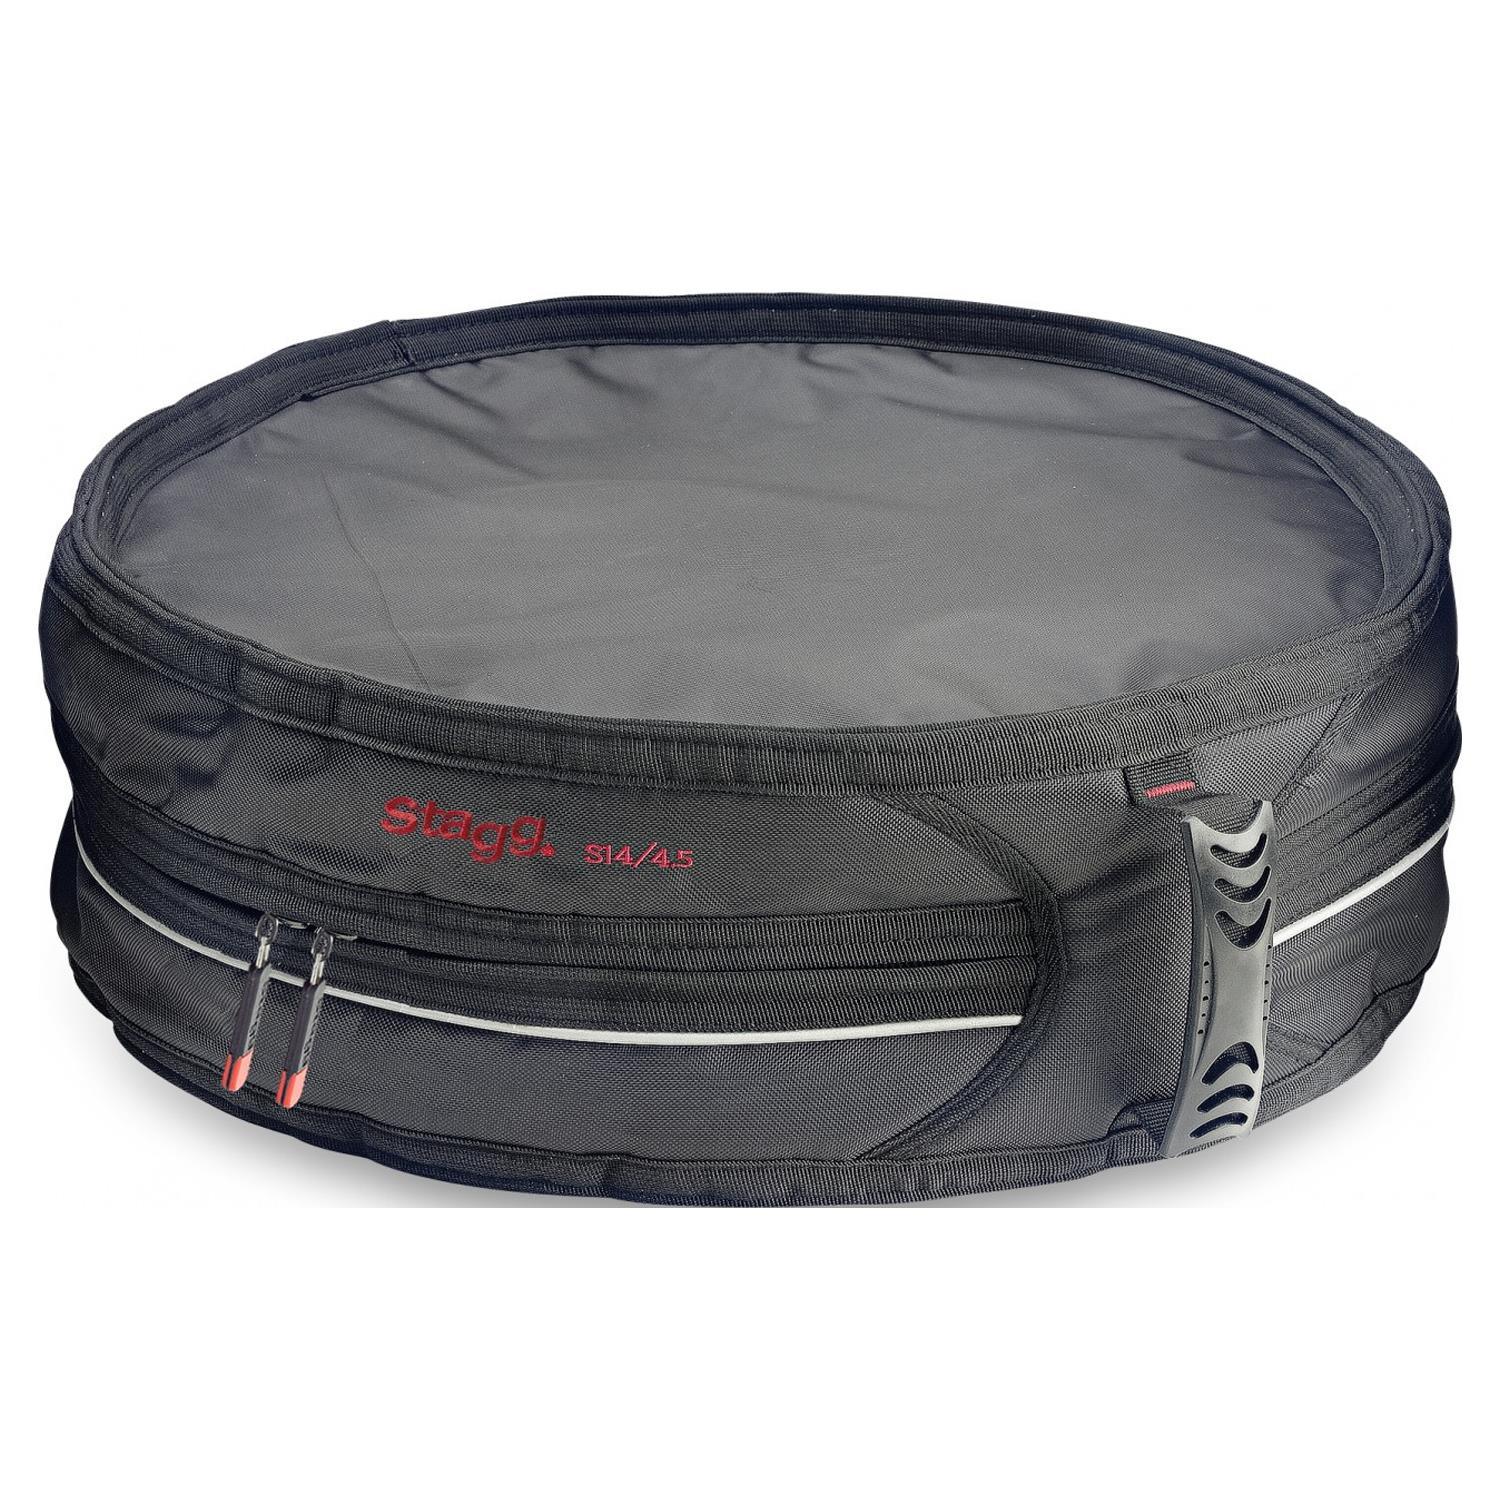 Stagg SSDB-14/4.5 14" Snare Drum Case - DY Pro Audio